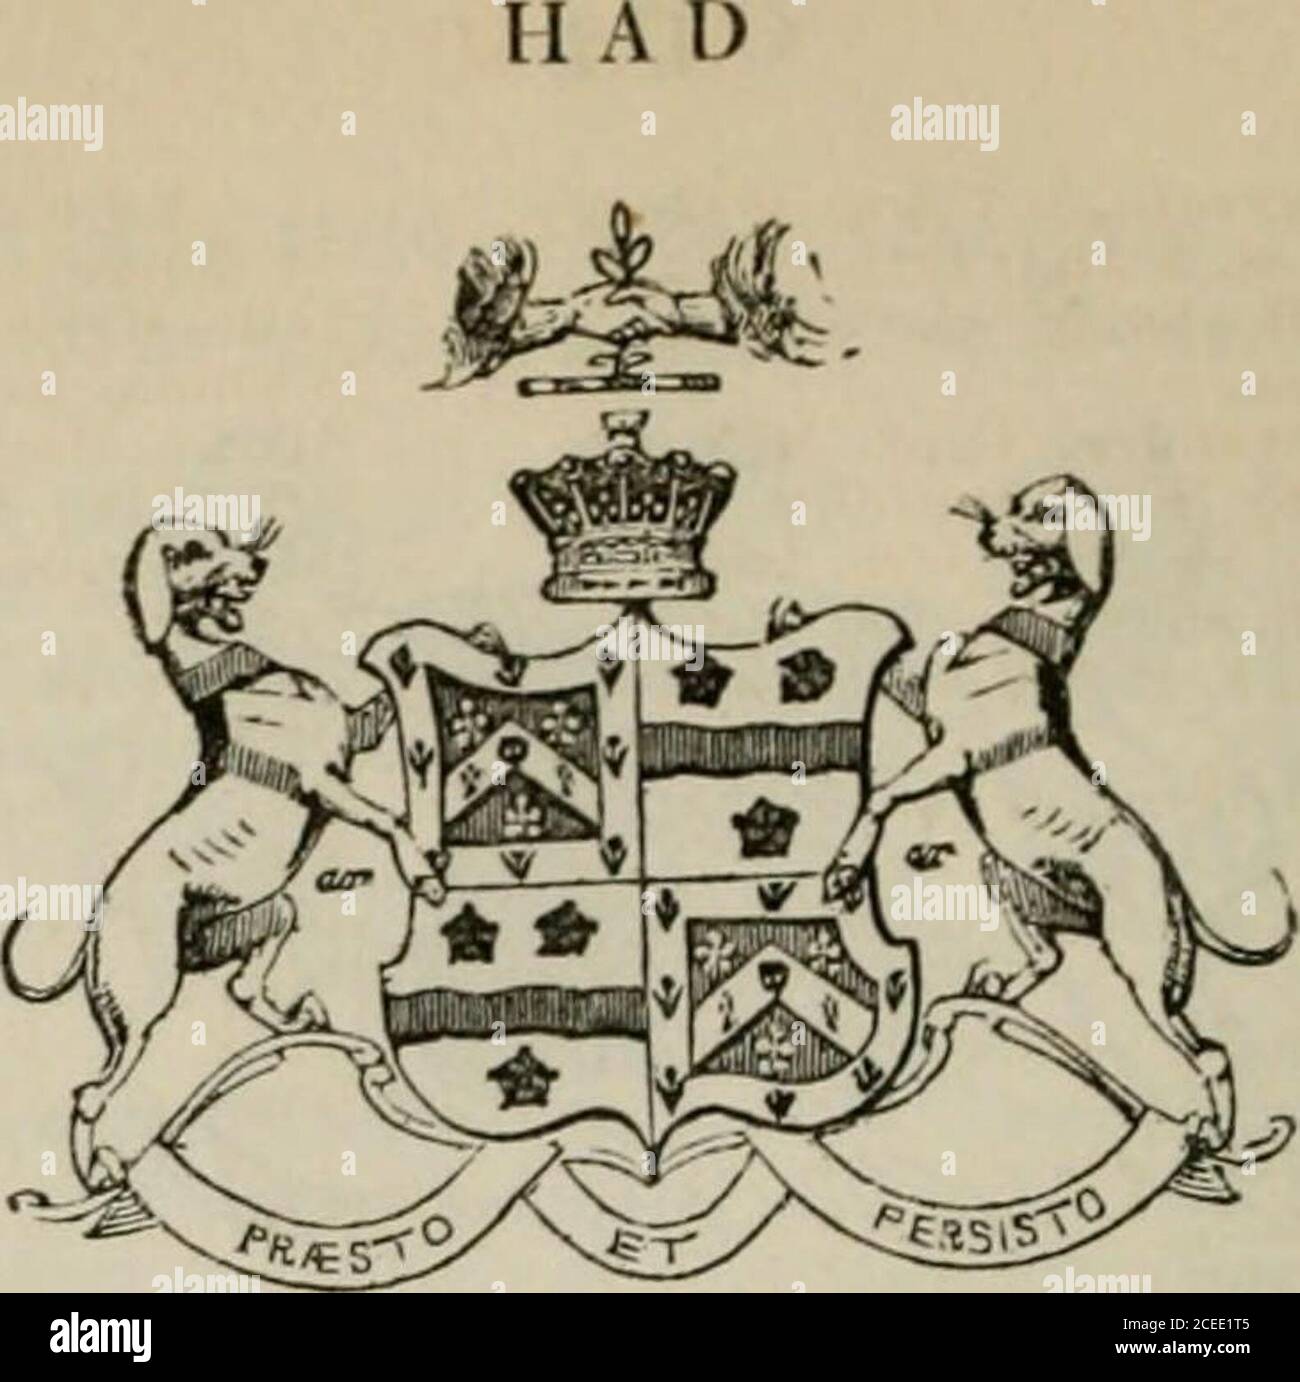 . The peerage of the British Empire as at present existing : arranged and printed from the personal communications of the nobility. Jan. 1834. 8 A soil, b. 25 Jan., d. in March, 1836. 9 A son, b. 22 March 1837. 10 A daughter, 6. 3 Oct. 1838. 11 A daughter, b. 16 Dec. 1840. 4 Hon. Isabella. 5 Hon. Richard. 6 Katharine, d. 11 Dec. 1829, having m. Nov. 1826, Dudley Persse, Esq., of Roxburgh, Co. Gal way. 7 Rev. James, d. unm. 7 May 1829. 8 Hon. and Rev. William, Rector of Killinane, w. 7 Feb. 1837, Isabella- Sabina, 4tli daughter of the late Henry Hewett, Esq. 9 Hon. Henrietta, m. 27 June 1838, Stock Photo